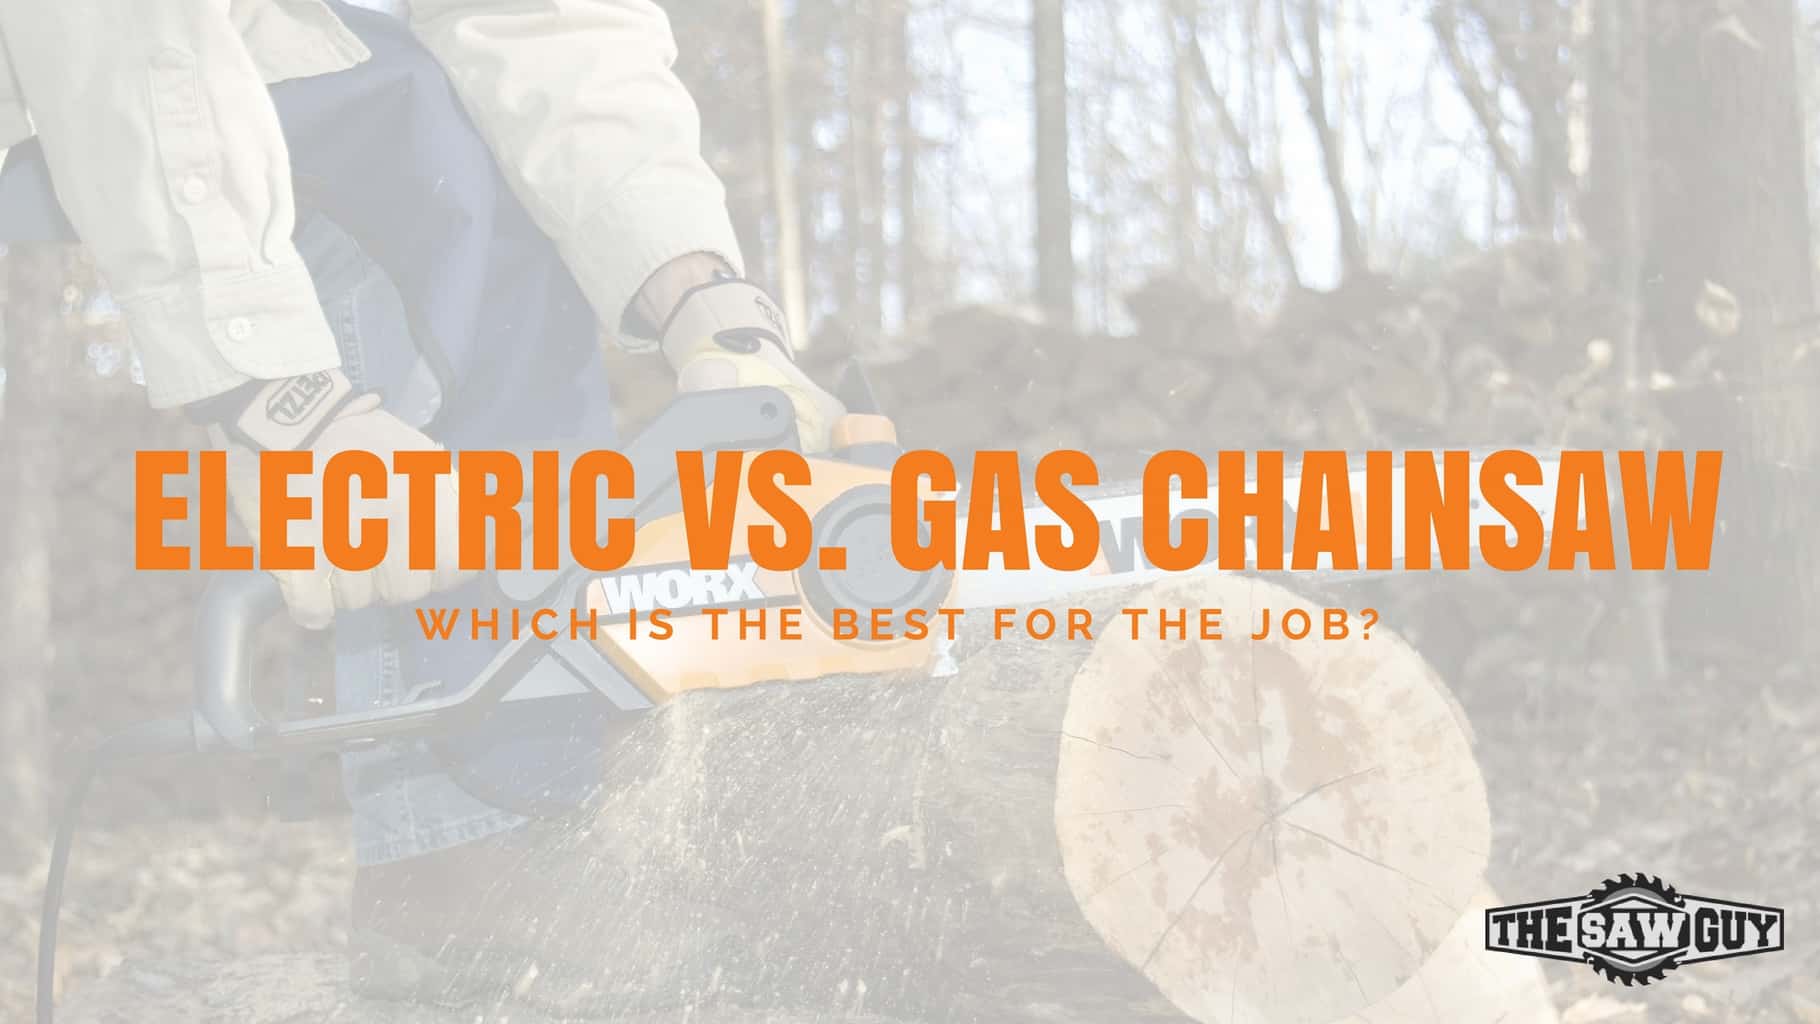 ELECTRIC VS. GAS CHAINSAW